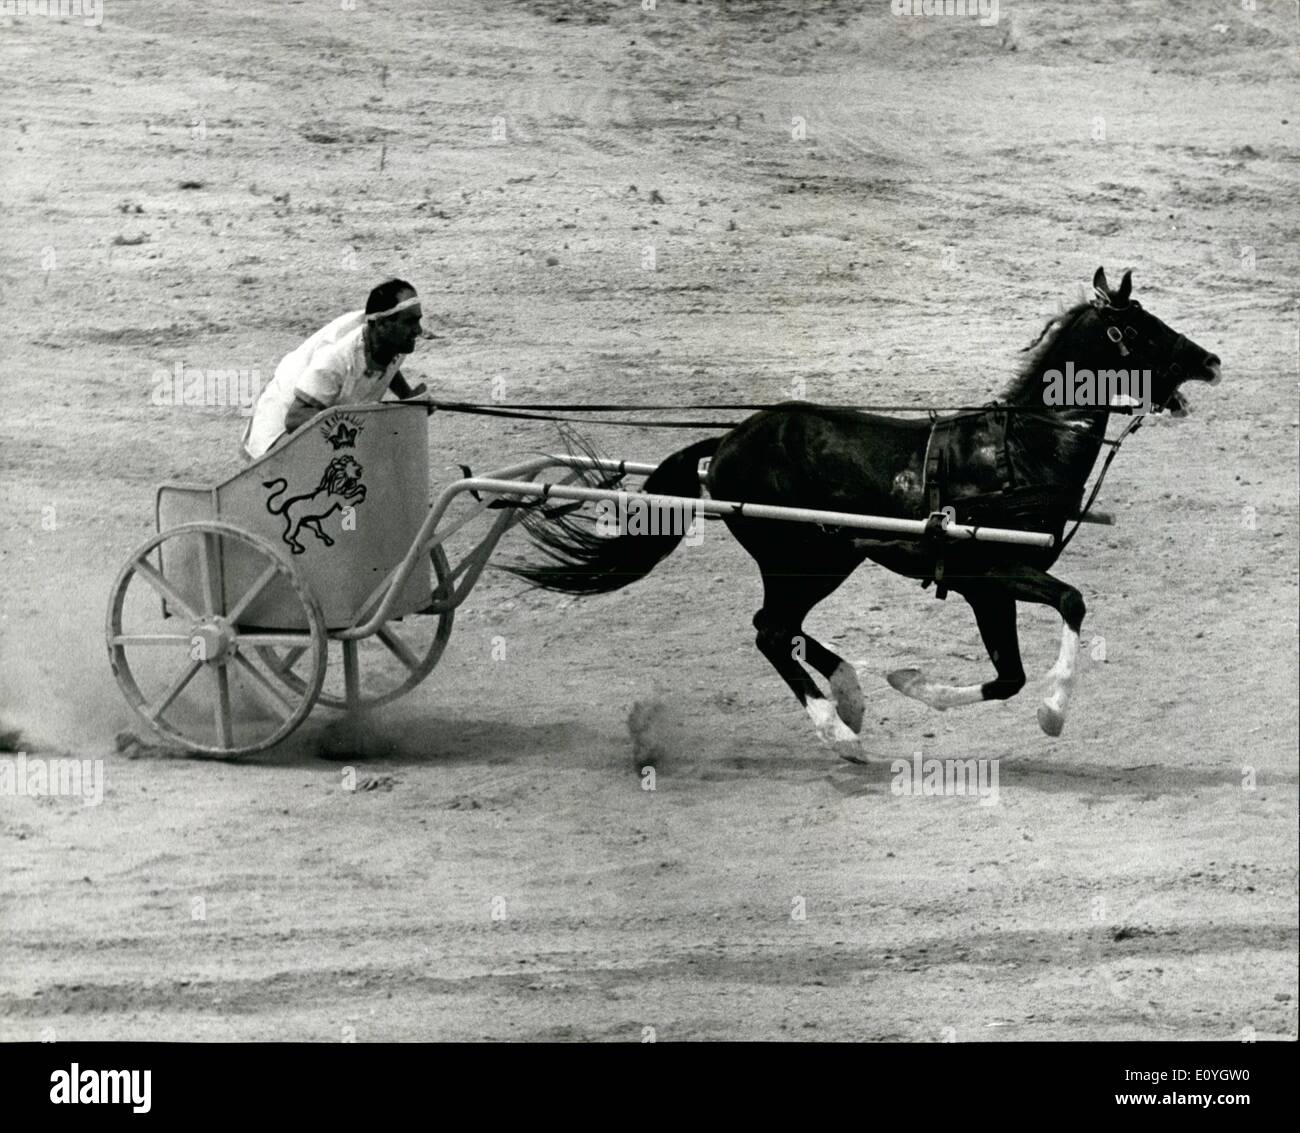 May 05, 1970 - Chariots race again at the Roman Hippodrome at Tyre in the Lebanon; To mark the official opening of the recently Stock Photo